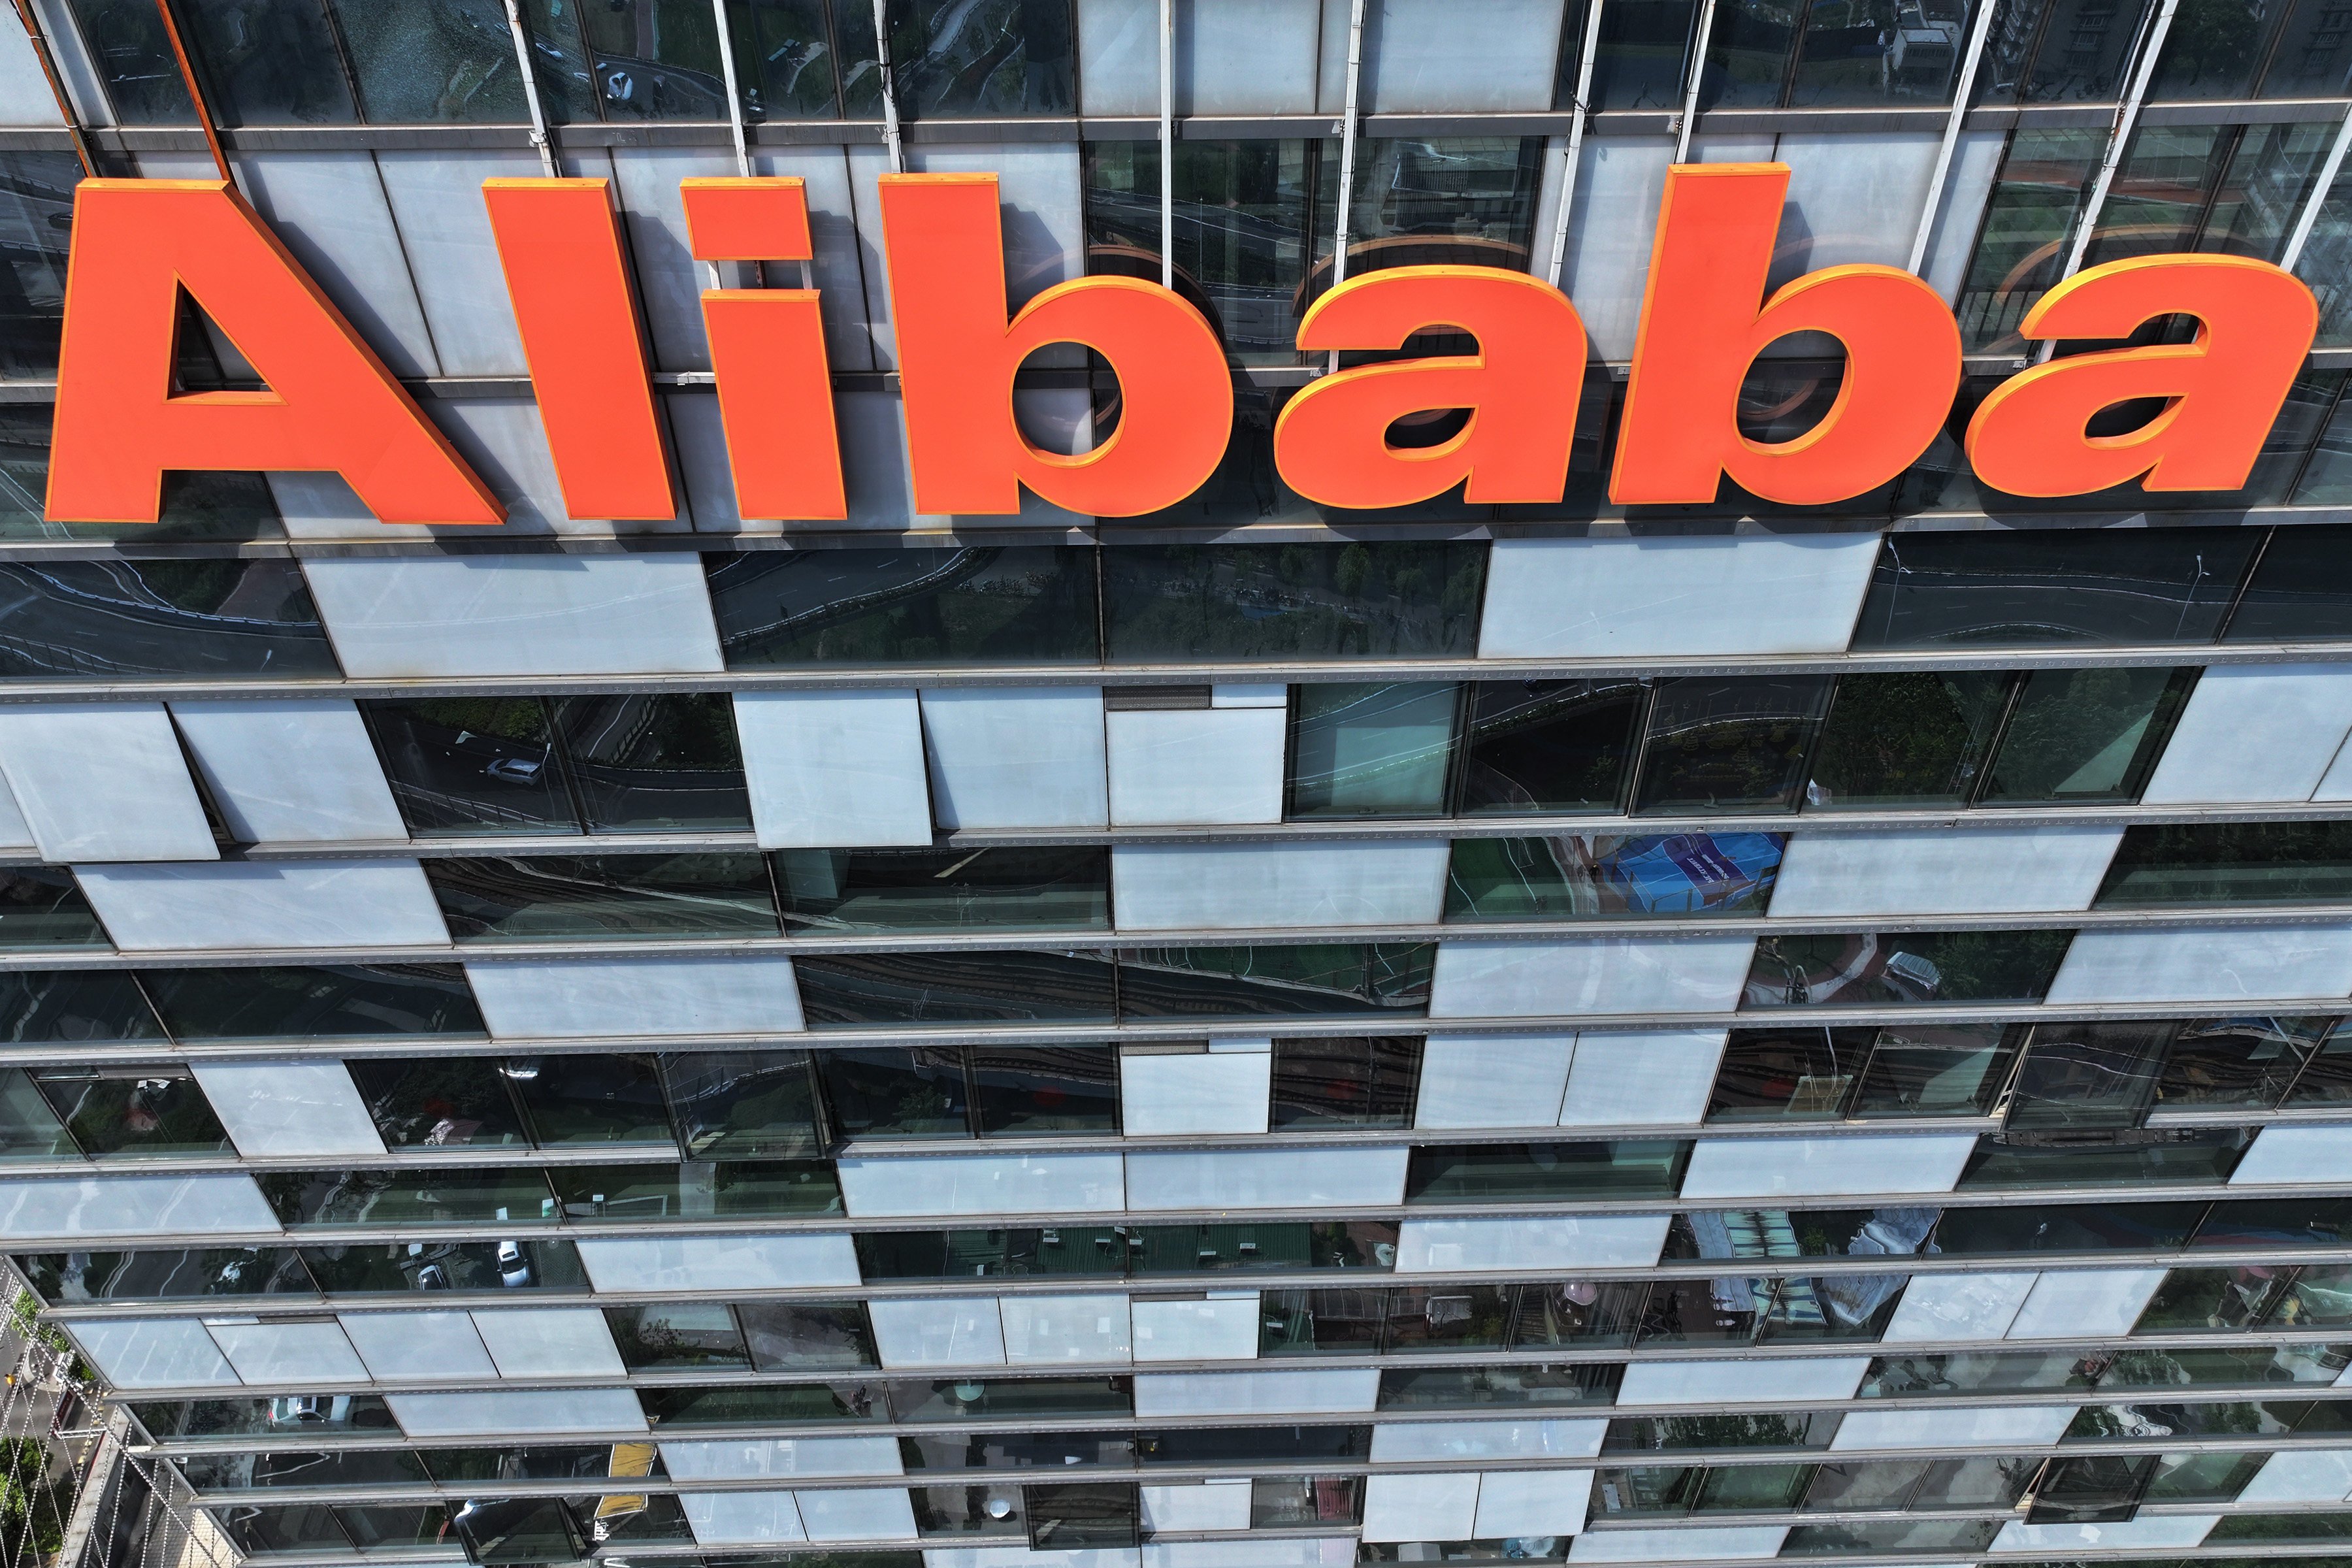 Alibaba has reported “encouraging” sales during the ongoing 618 shopping festival. Photo: CFOTO/Future Publishing via Getty Images